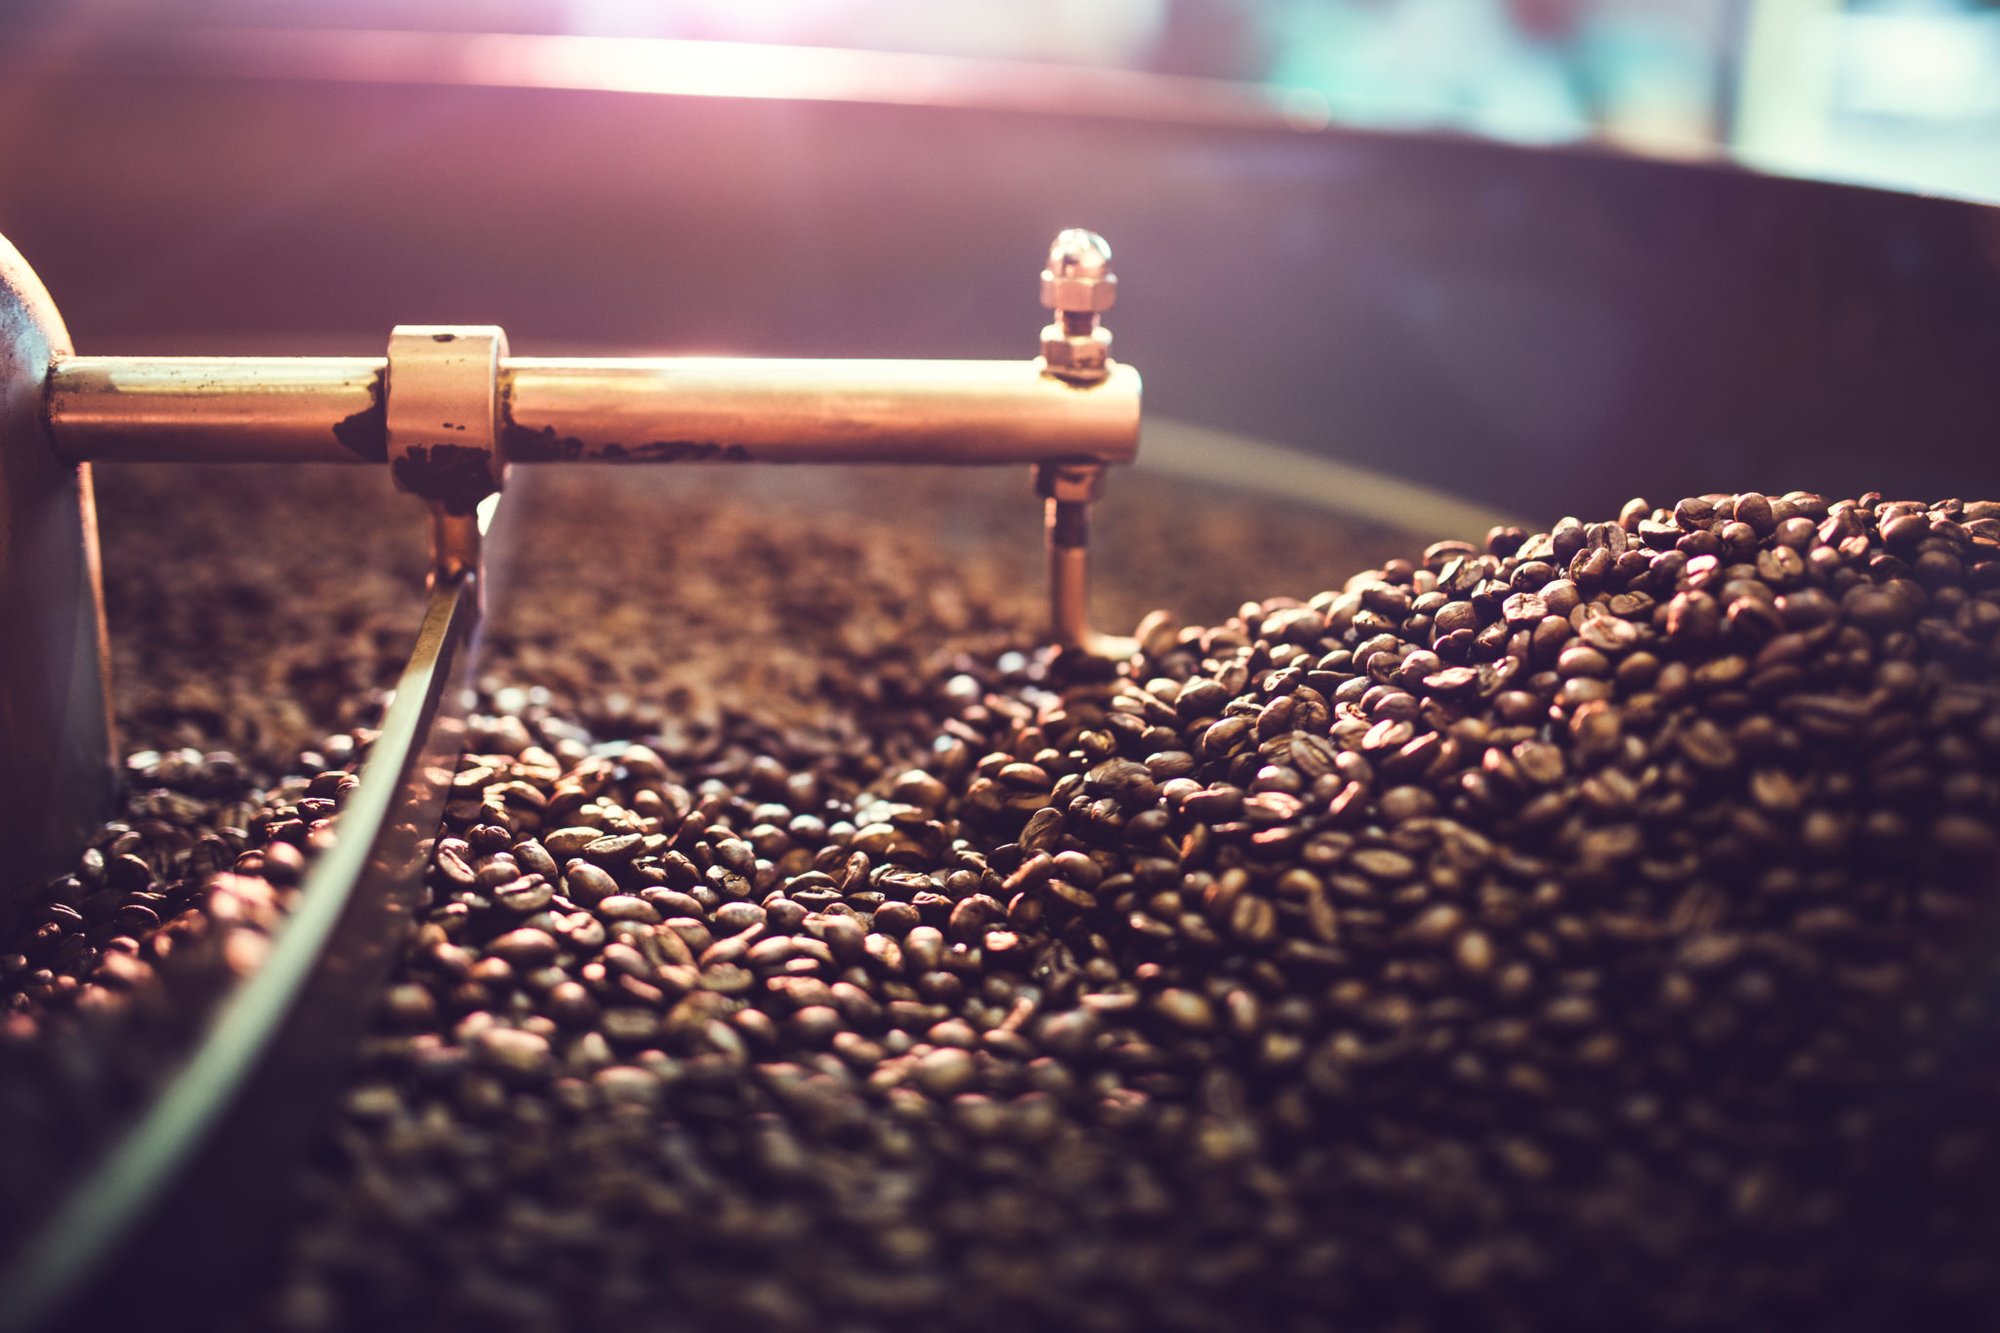 The process of roasting a batch of high-quality, single-origin coffee beans in a large industrial roaster; the toasted beans are in the cooling cycle. Photo courtesy of Getty Images.